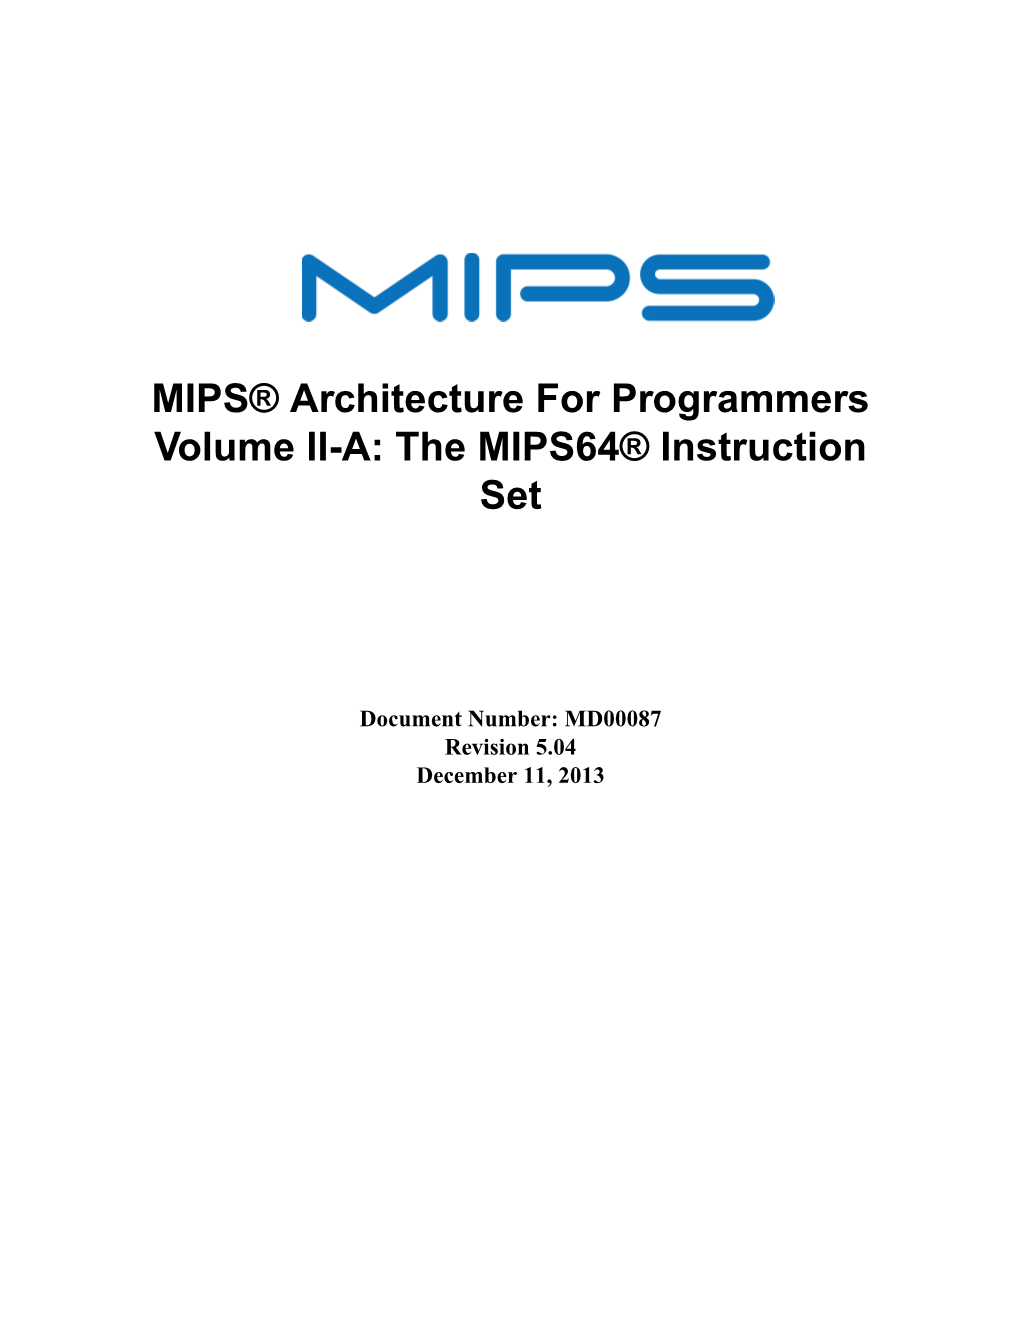 MIPS® Architecture for Programmers Volume II-A: the MIPS64® Instruction